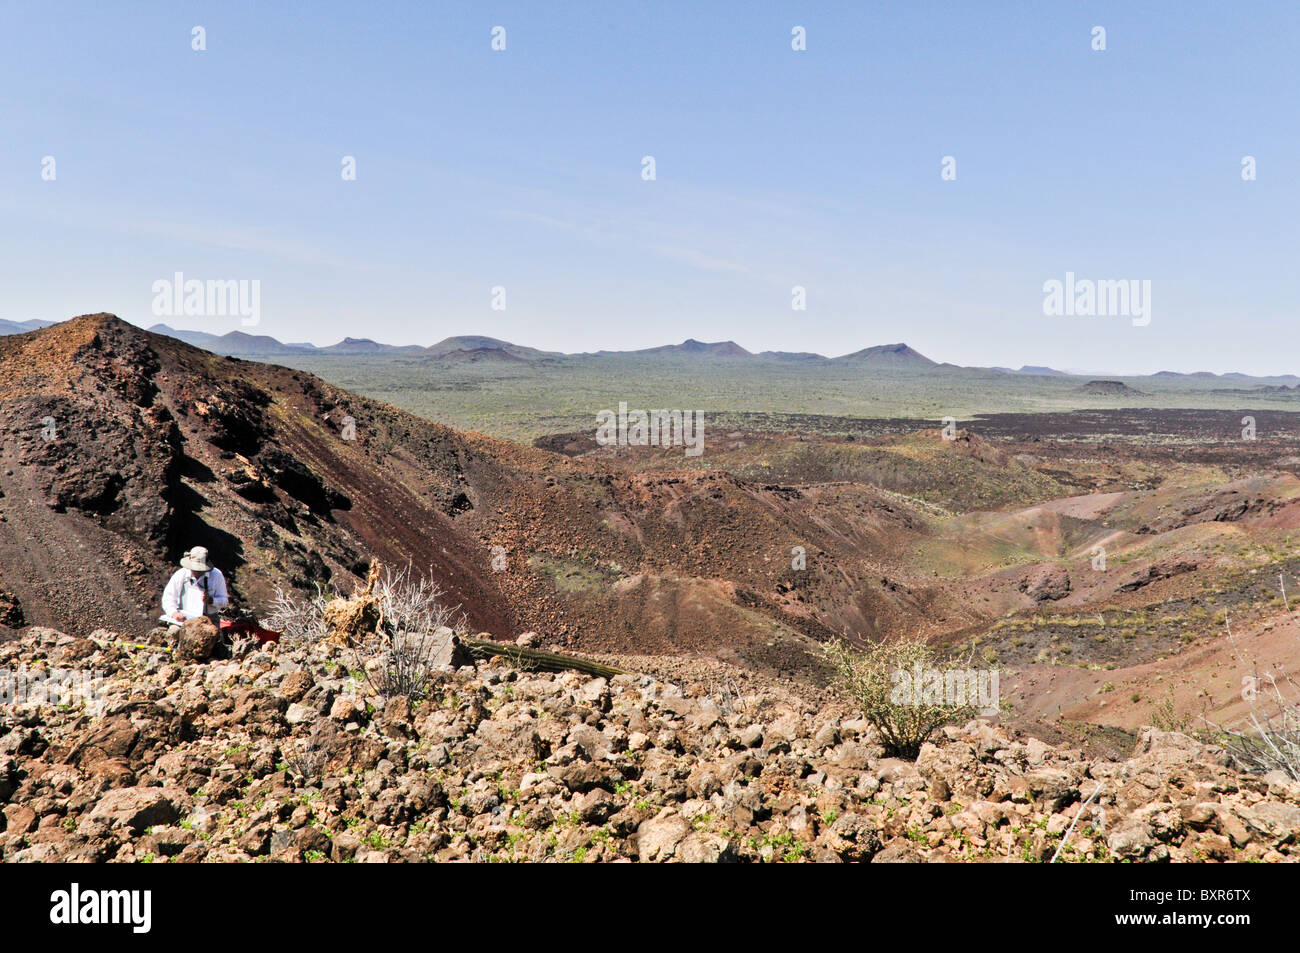 Geologist taking notes while viewing interior of Tecolote cinder cone, El Pinacate Biosphere Reserve, Sonora, Mexico Stock Photo